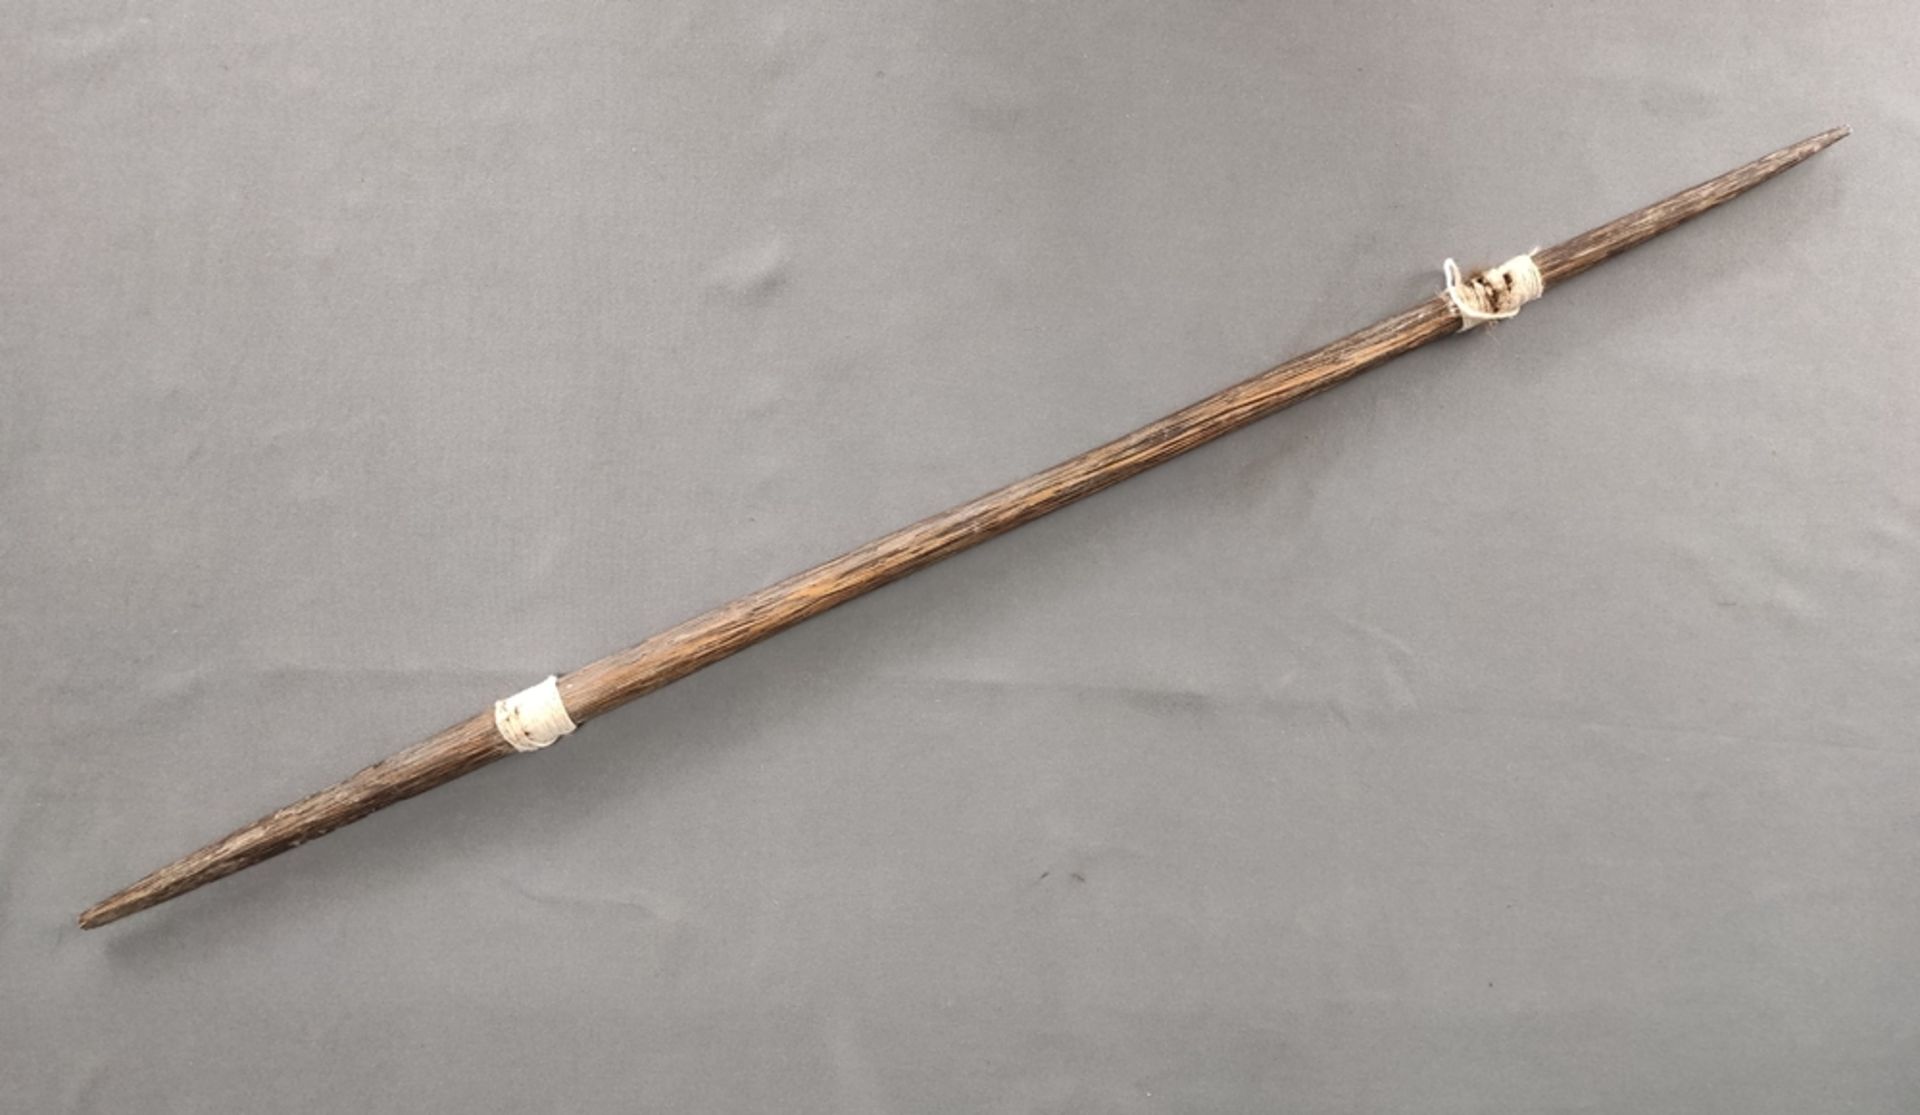 Indigenous spear, wood wrapped with yarn, Ecuador, end of 19th/beginning of 20th century, l 73 cm